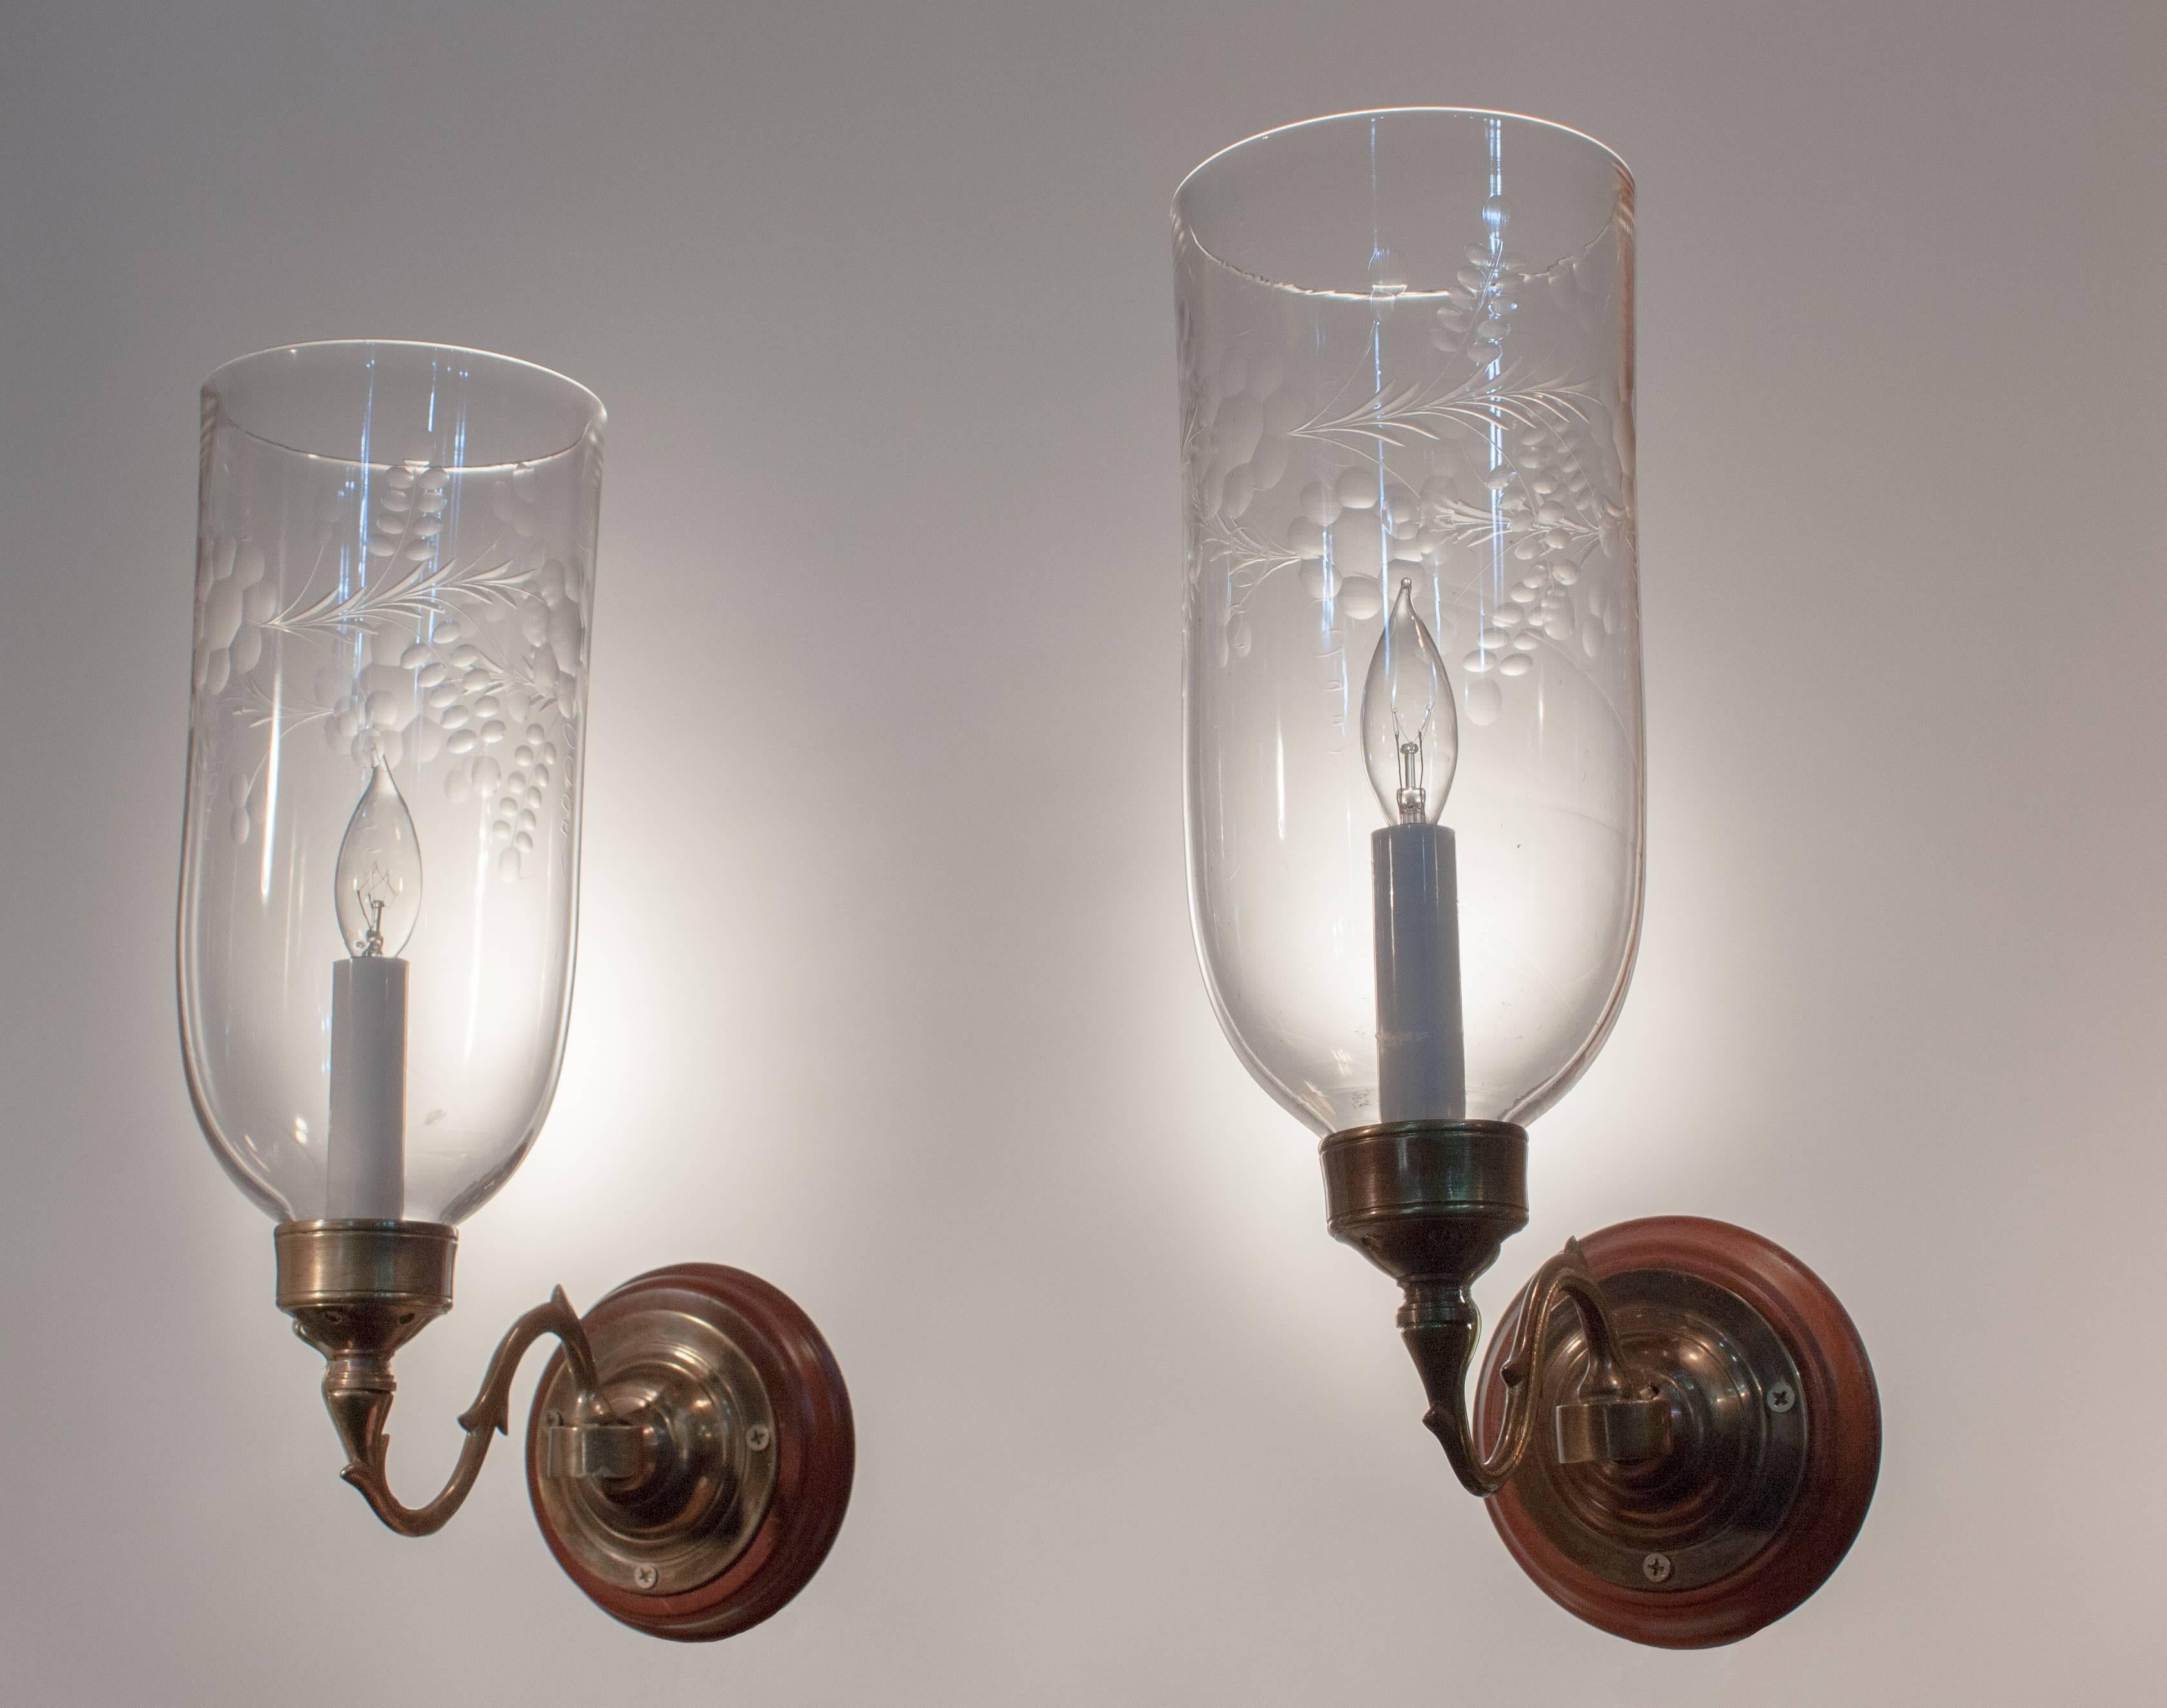 Beautiful pair of 19th century English hurricane sconce shades with straight form and a tasteful flower/vine etching. The quality of the handblown glass is excellent, including subtle swirling and air bubbles. Originally for candles, the wall